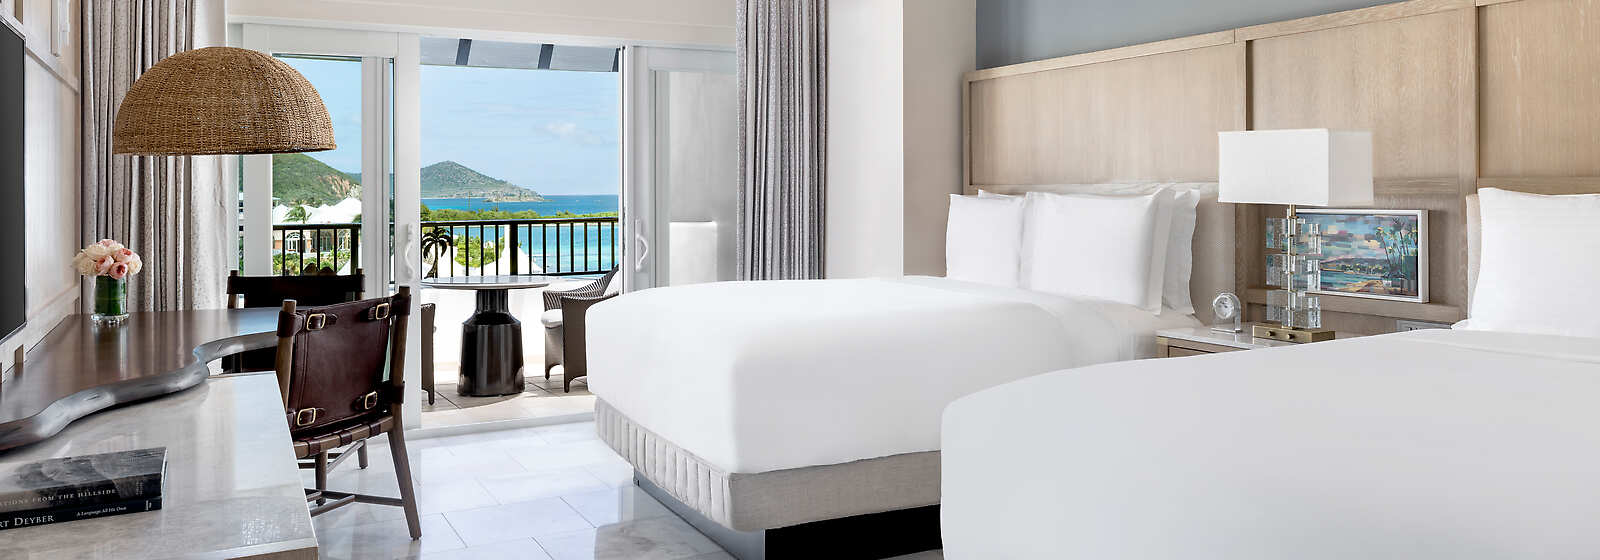 Our renewed Ocean View Rooms feature sweeping ocean views, comfortable two queen beds and a personal balcony